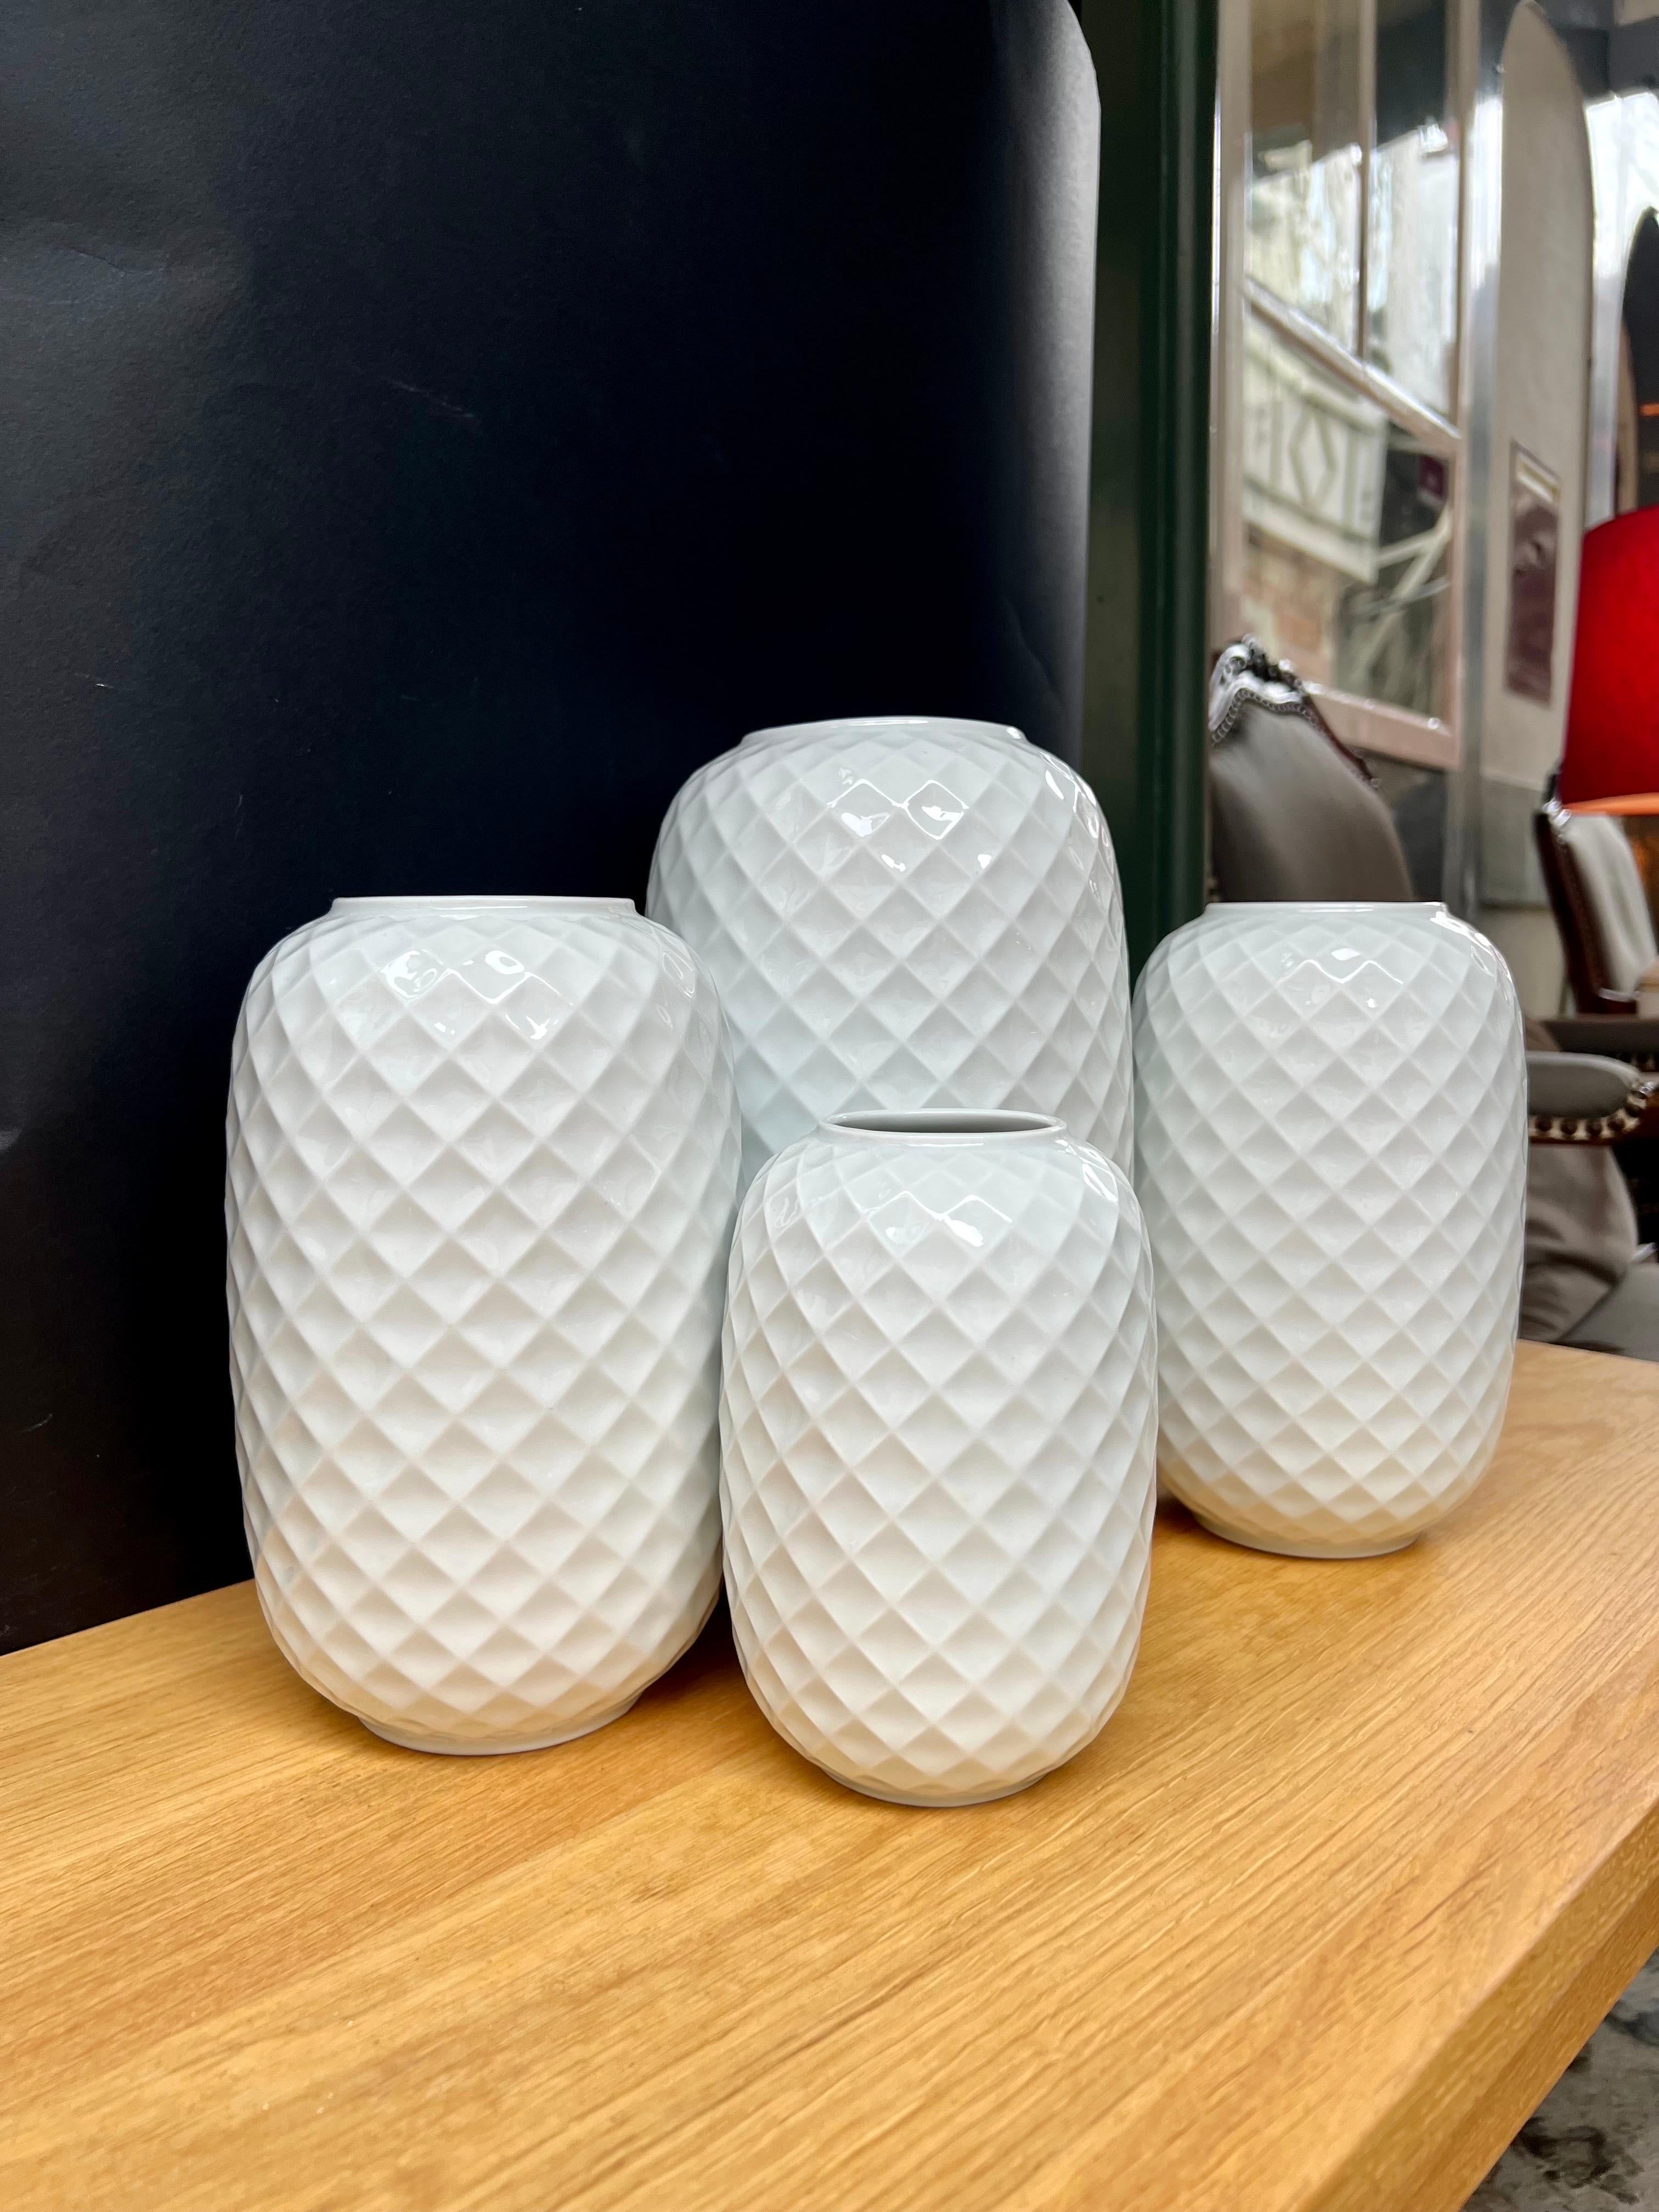 Mid-Century Modern / Op Art set of 4 glazed white porcelain vases from German manufacturer Thomas. This design belongs to their Holiday series, and came in production in the 1960. 

The beautifully rounded vases with its honeycomb / diamond